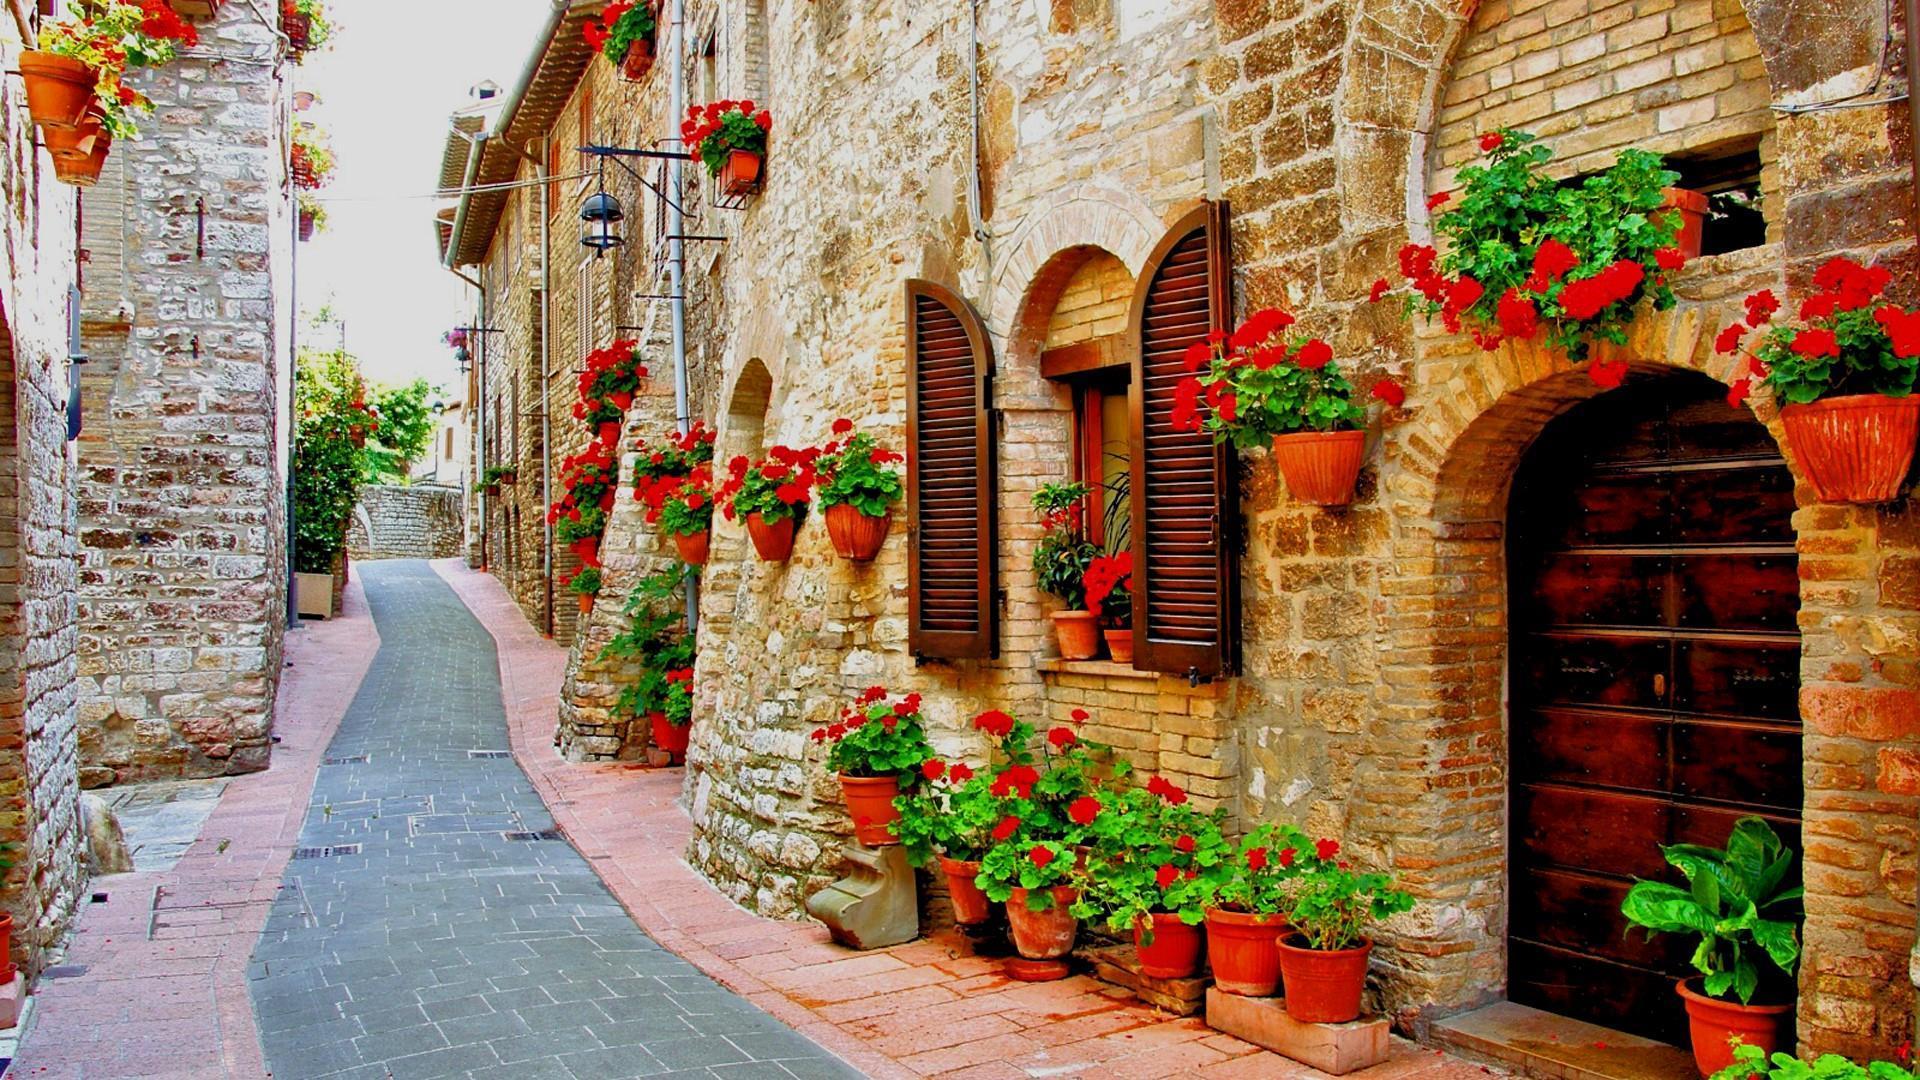 Flower Lined Street In The Town Of Assisi, Italy Wallpaper